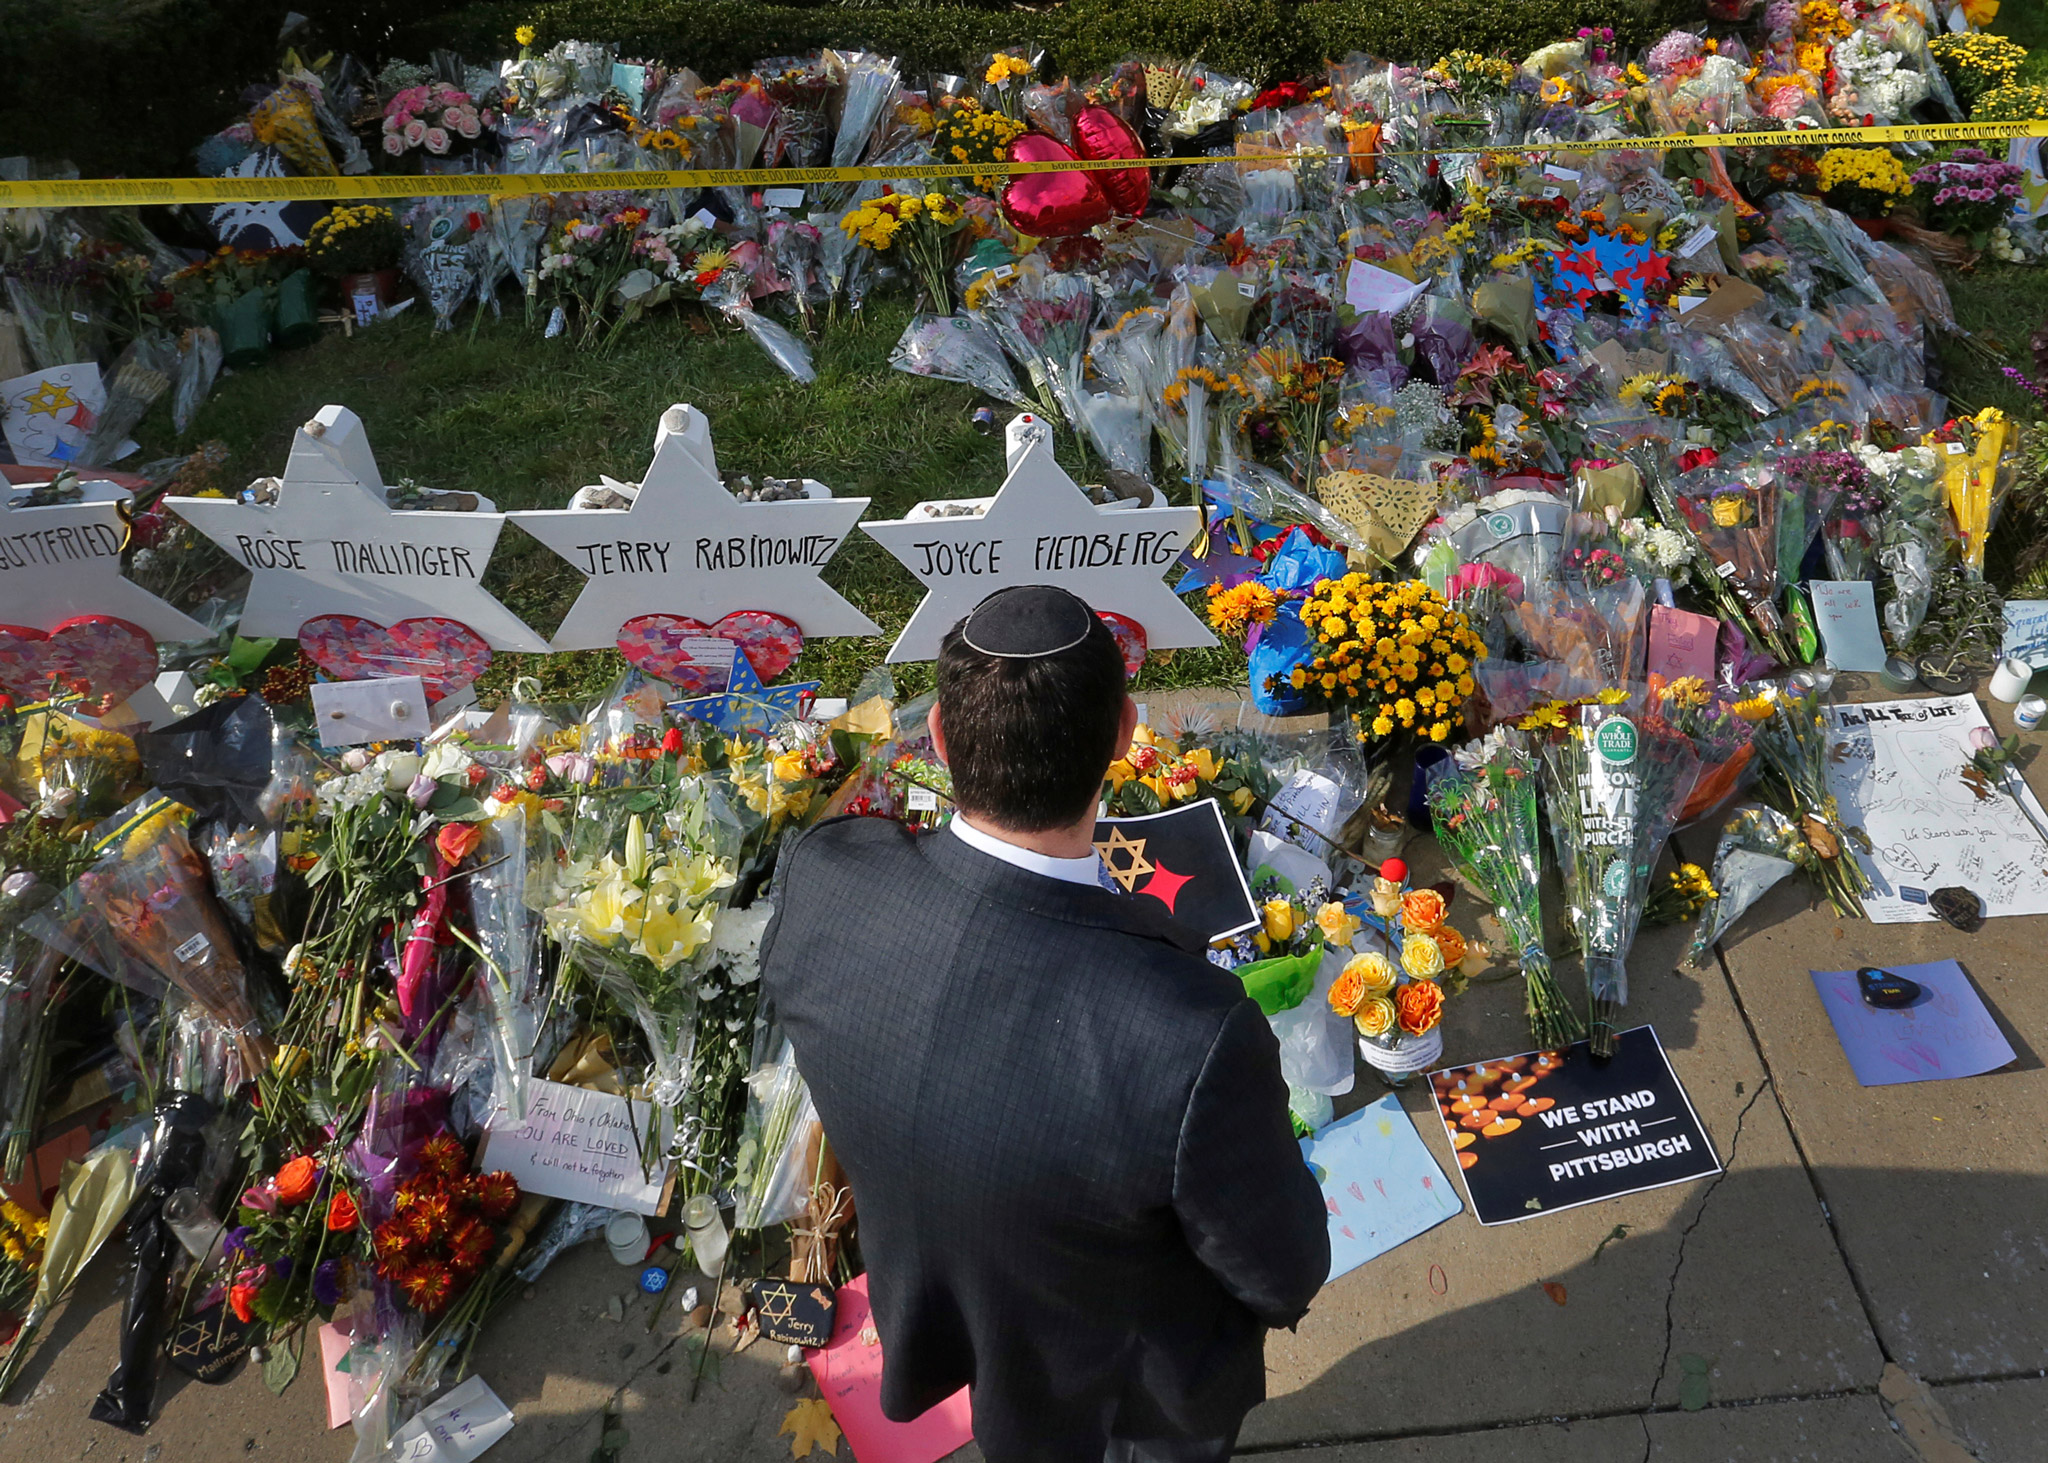 A memorial outside the Tree of Life synagogue